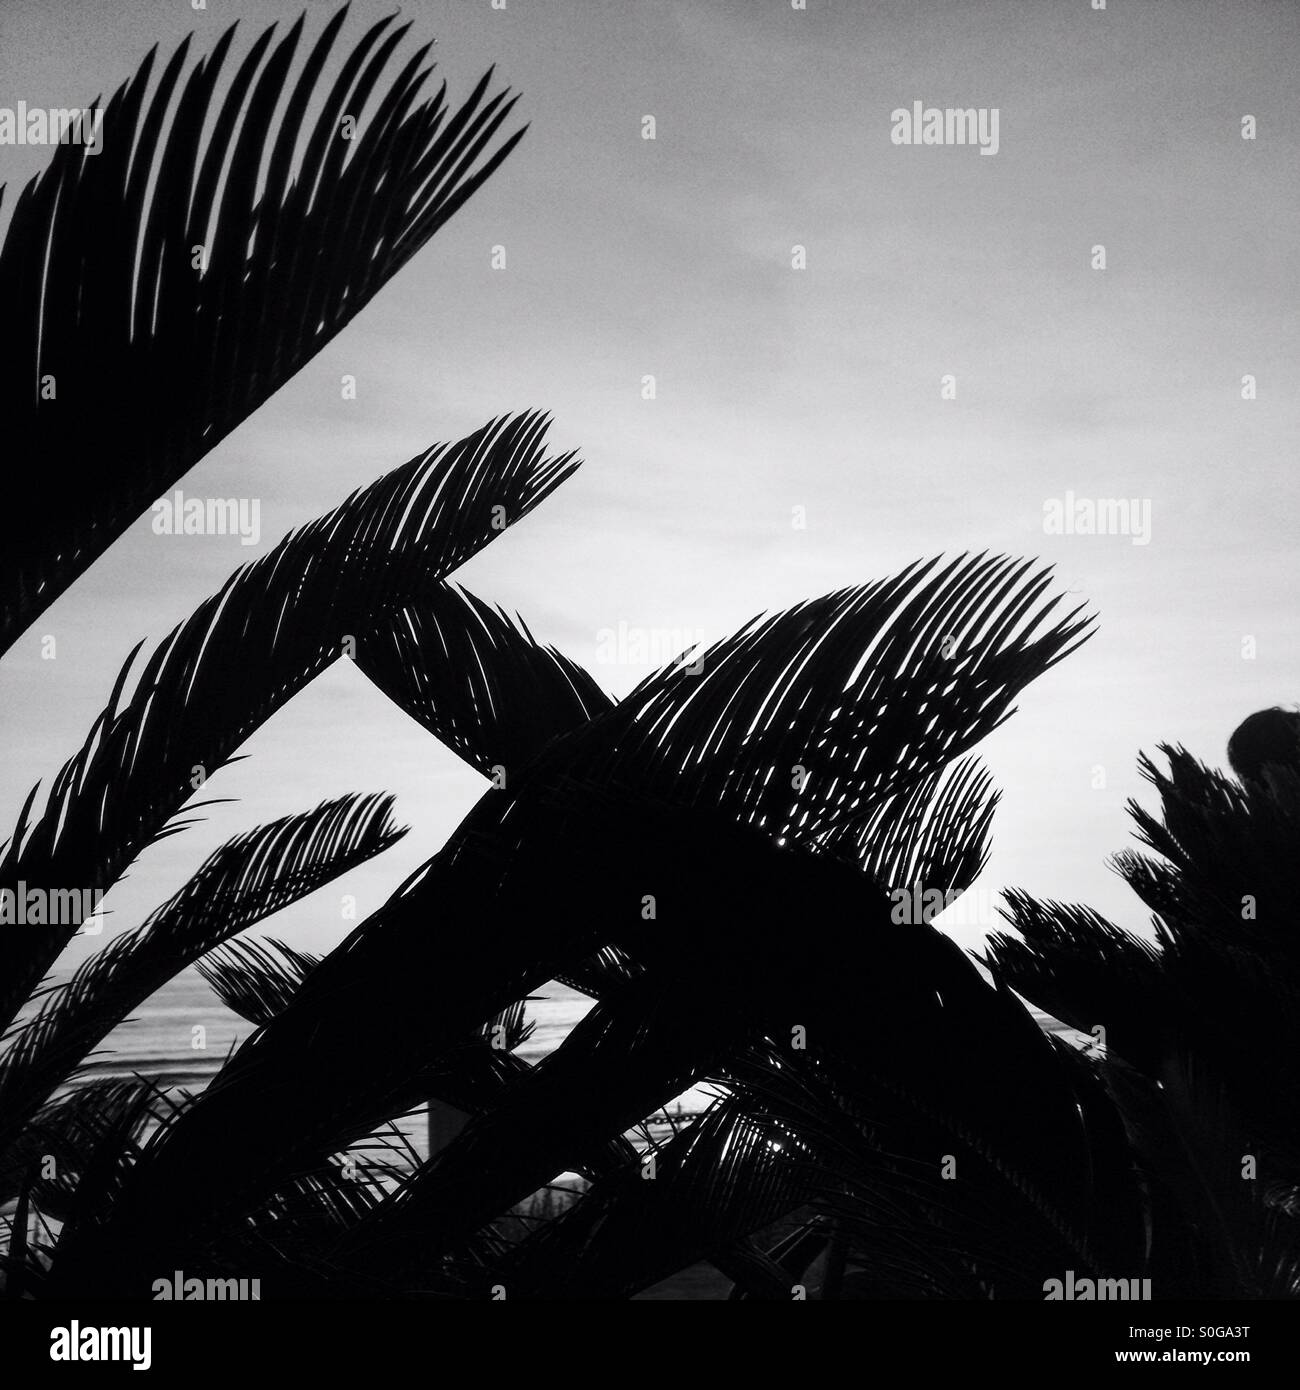 Backlit palm fronds on the Pacific coast of California. Black & white. High contrast. Stock Photo